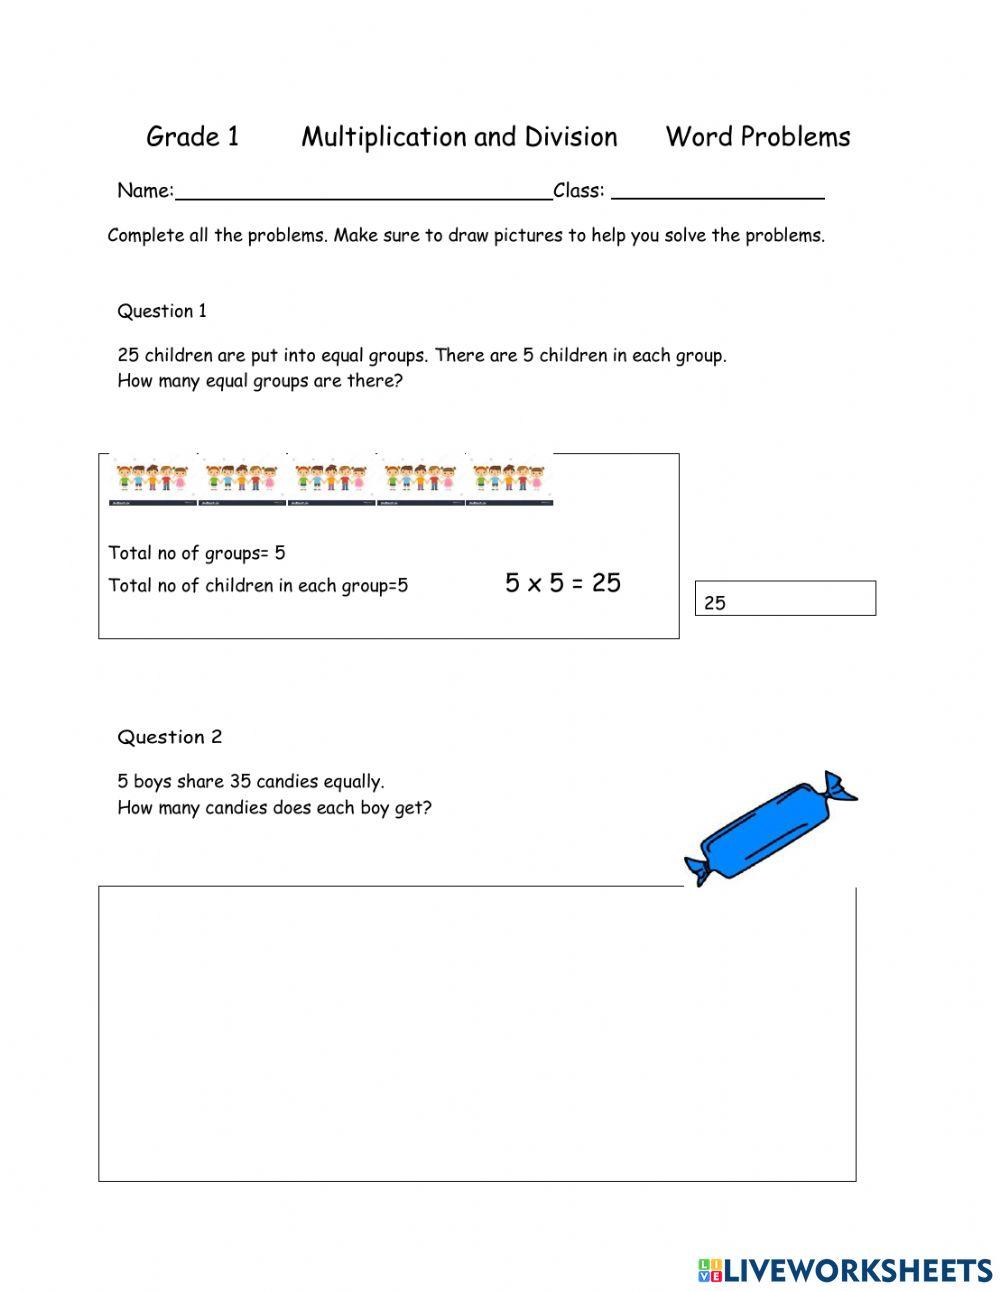 Word Problem Multiplication and Division